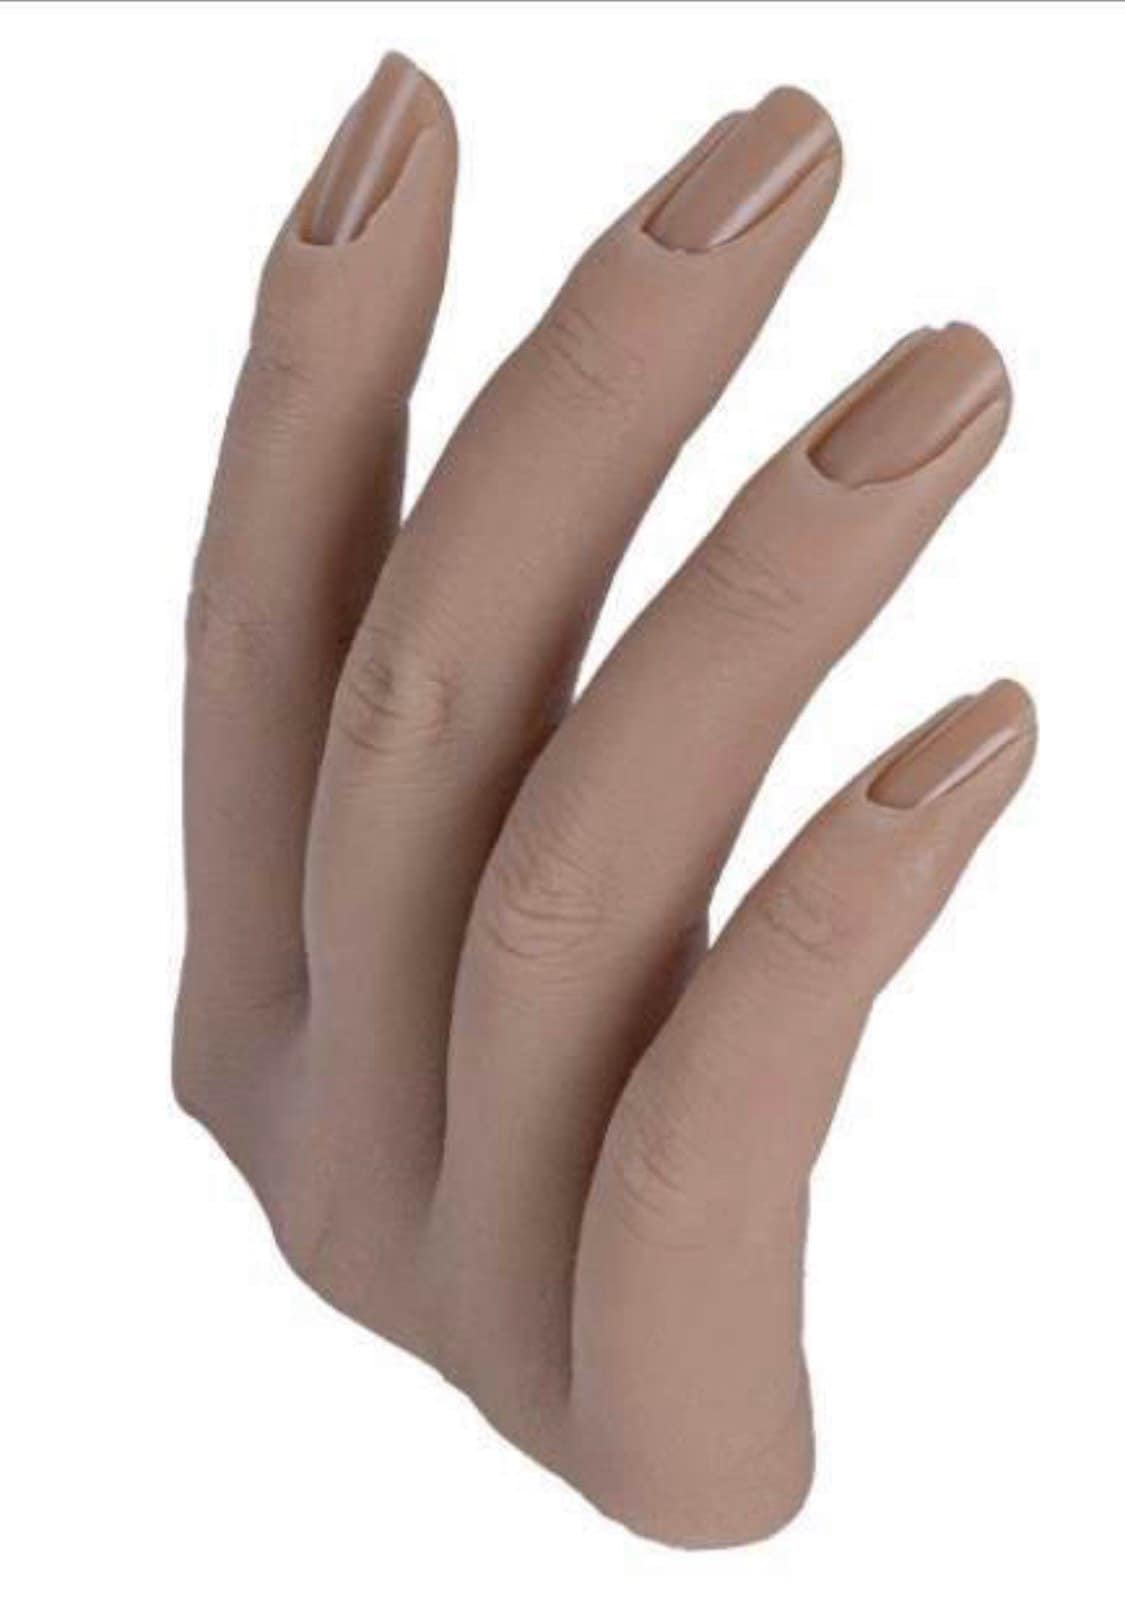 Practice Hand for Acrylic Nails, Fake Hand for Nails Practice, Flexible Bendable Mannequin Hand, Set of 2, Nail Art Training Prac, Size: 9